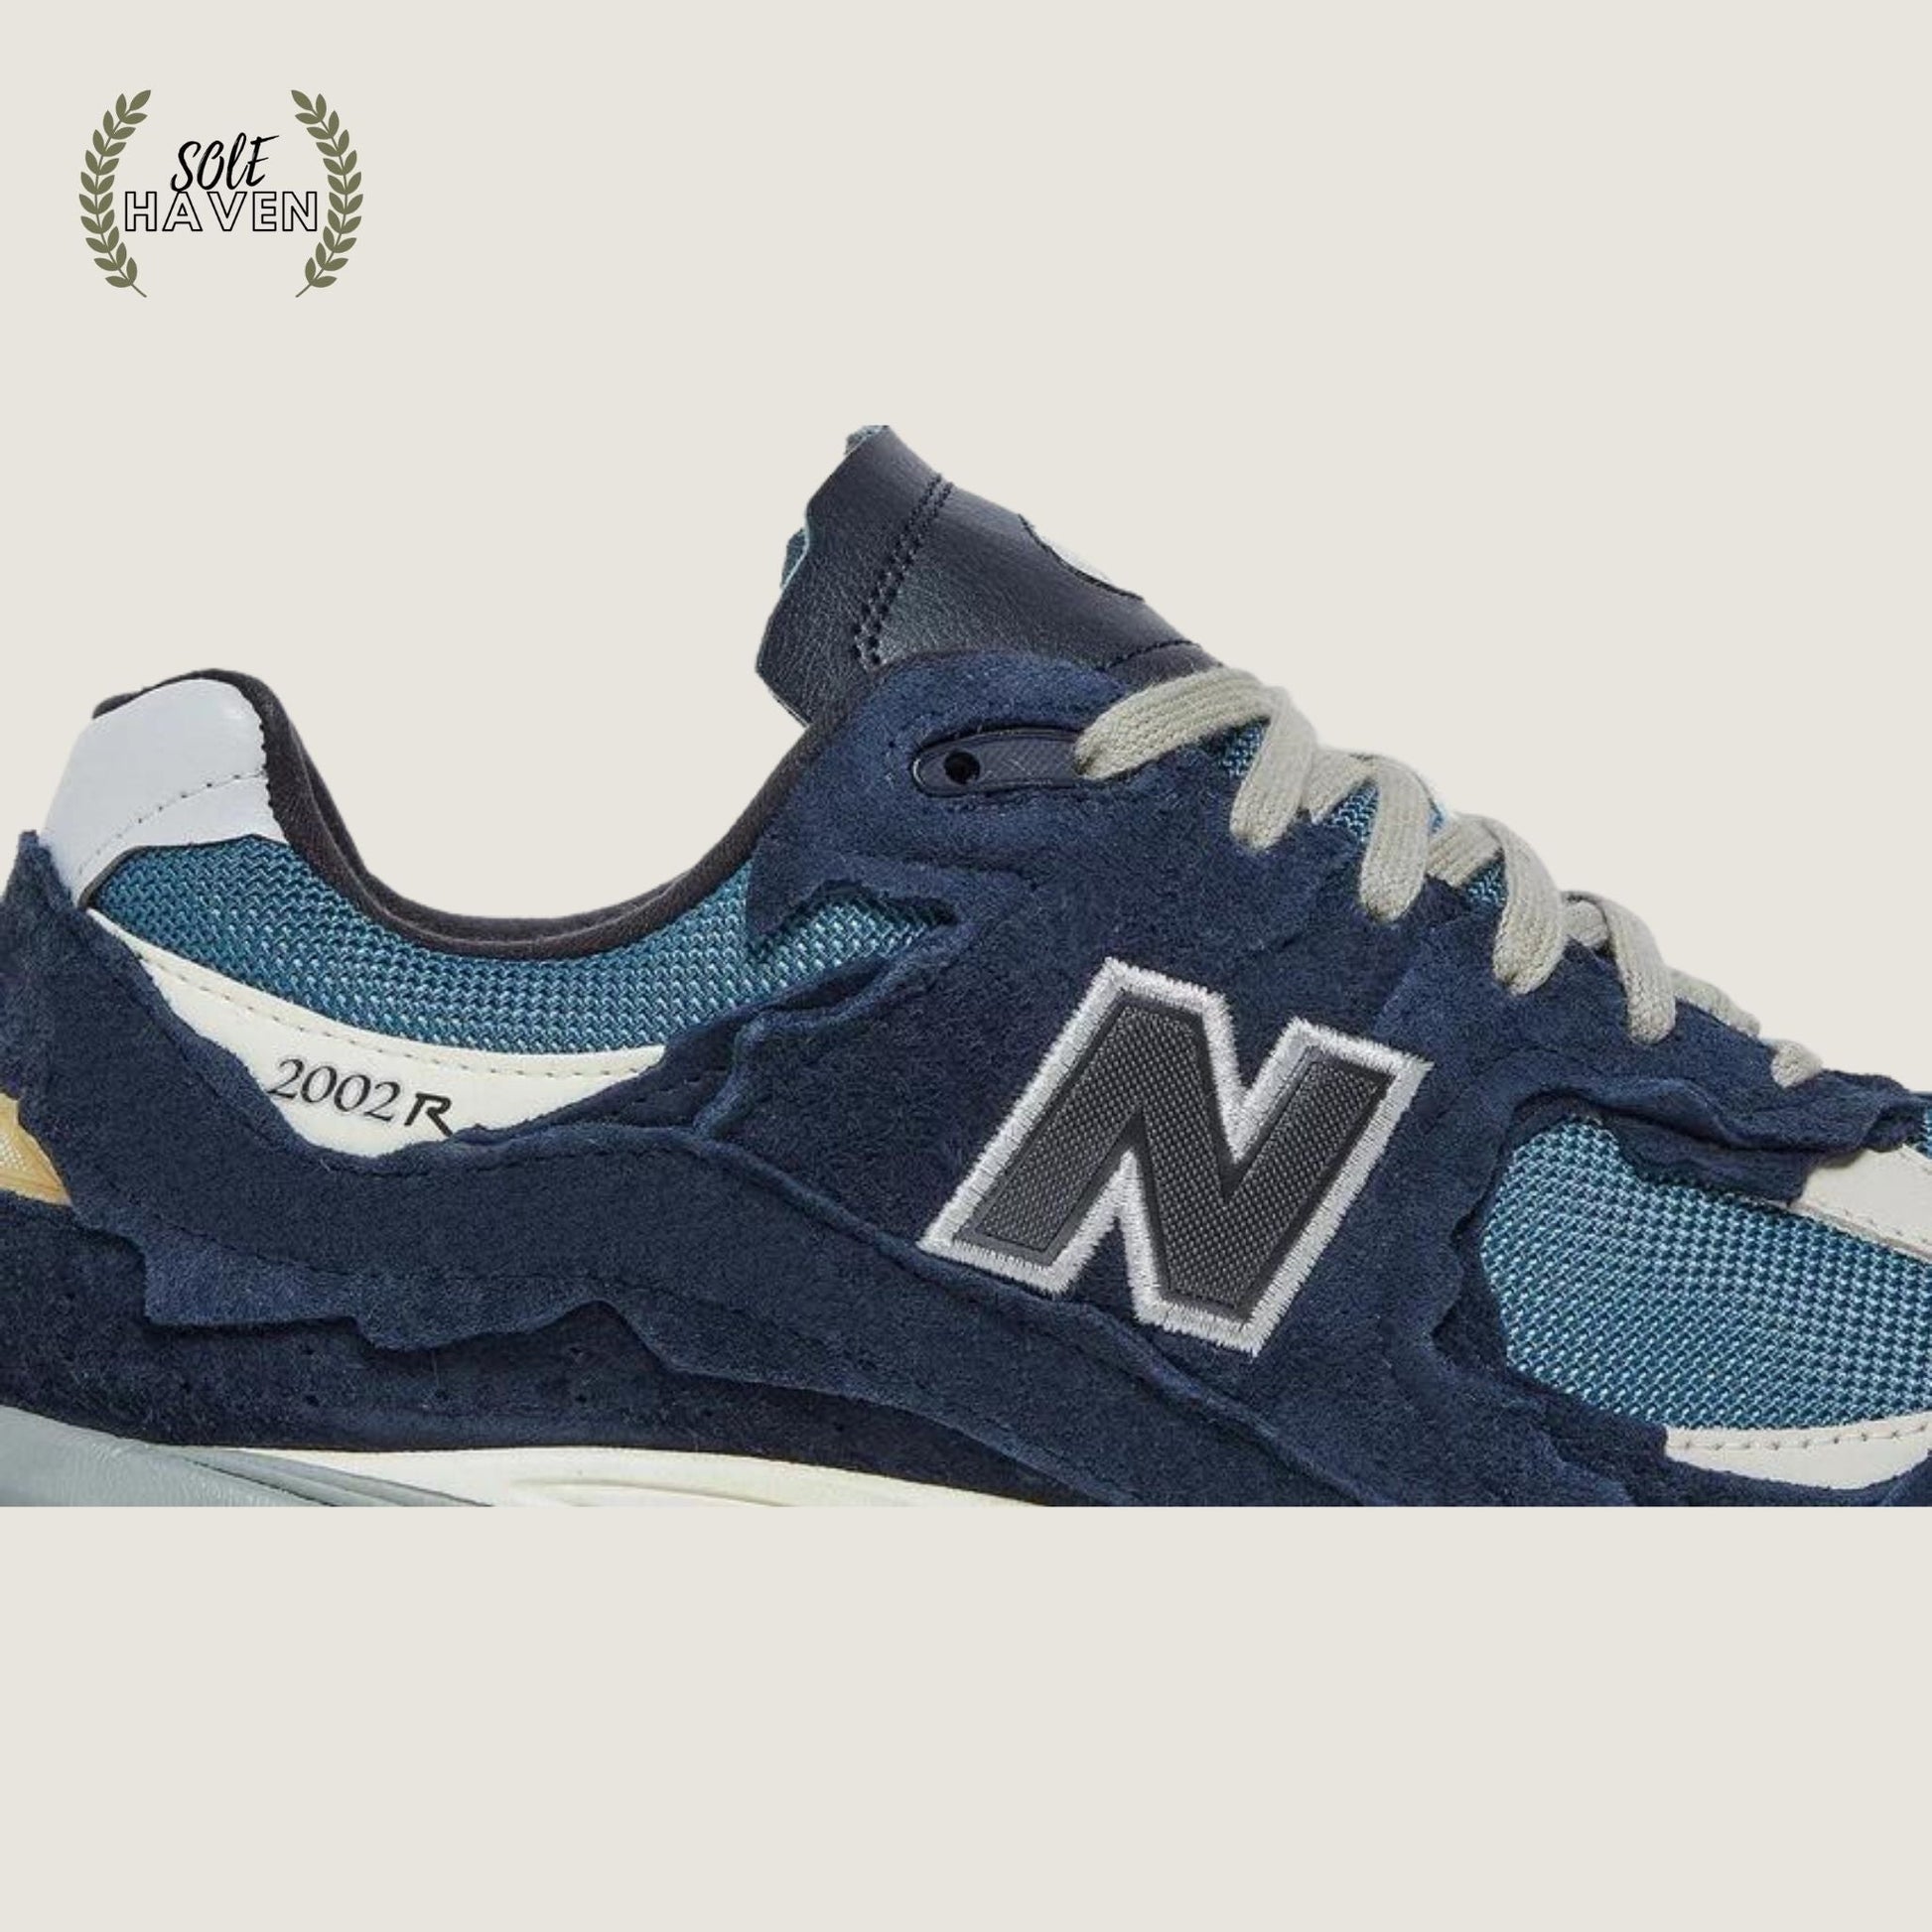 New Balance 2002R 'Protection Pack - Dark Navy' - Sole Haven